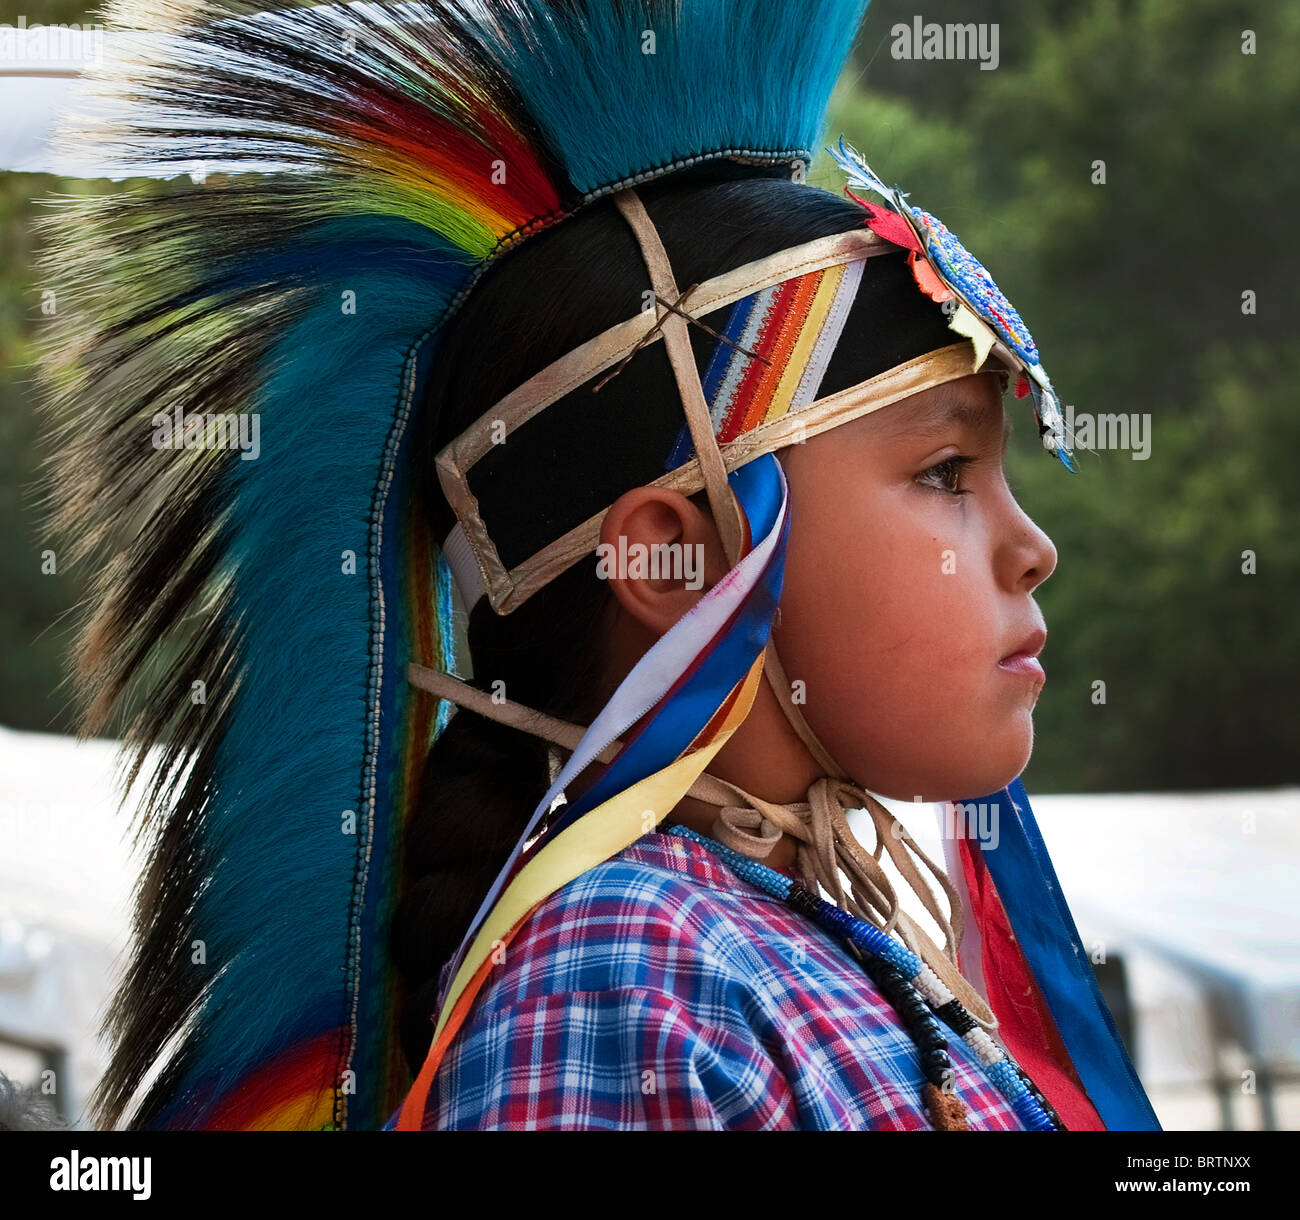 Portrait of a young Chumash native American teen Stock Photo